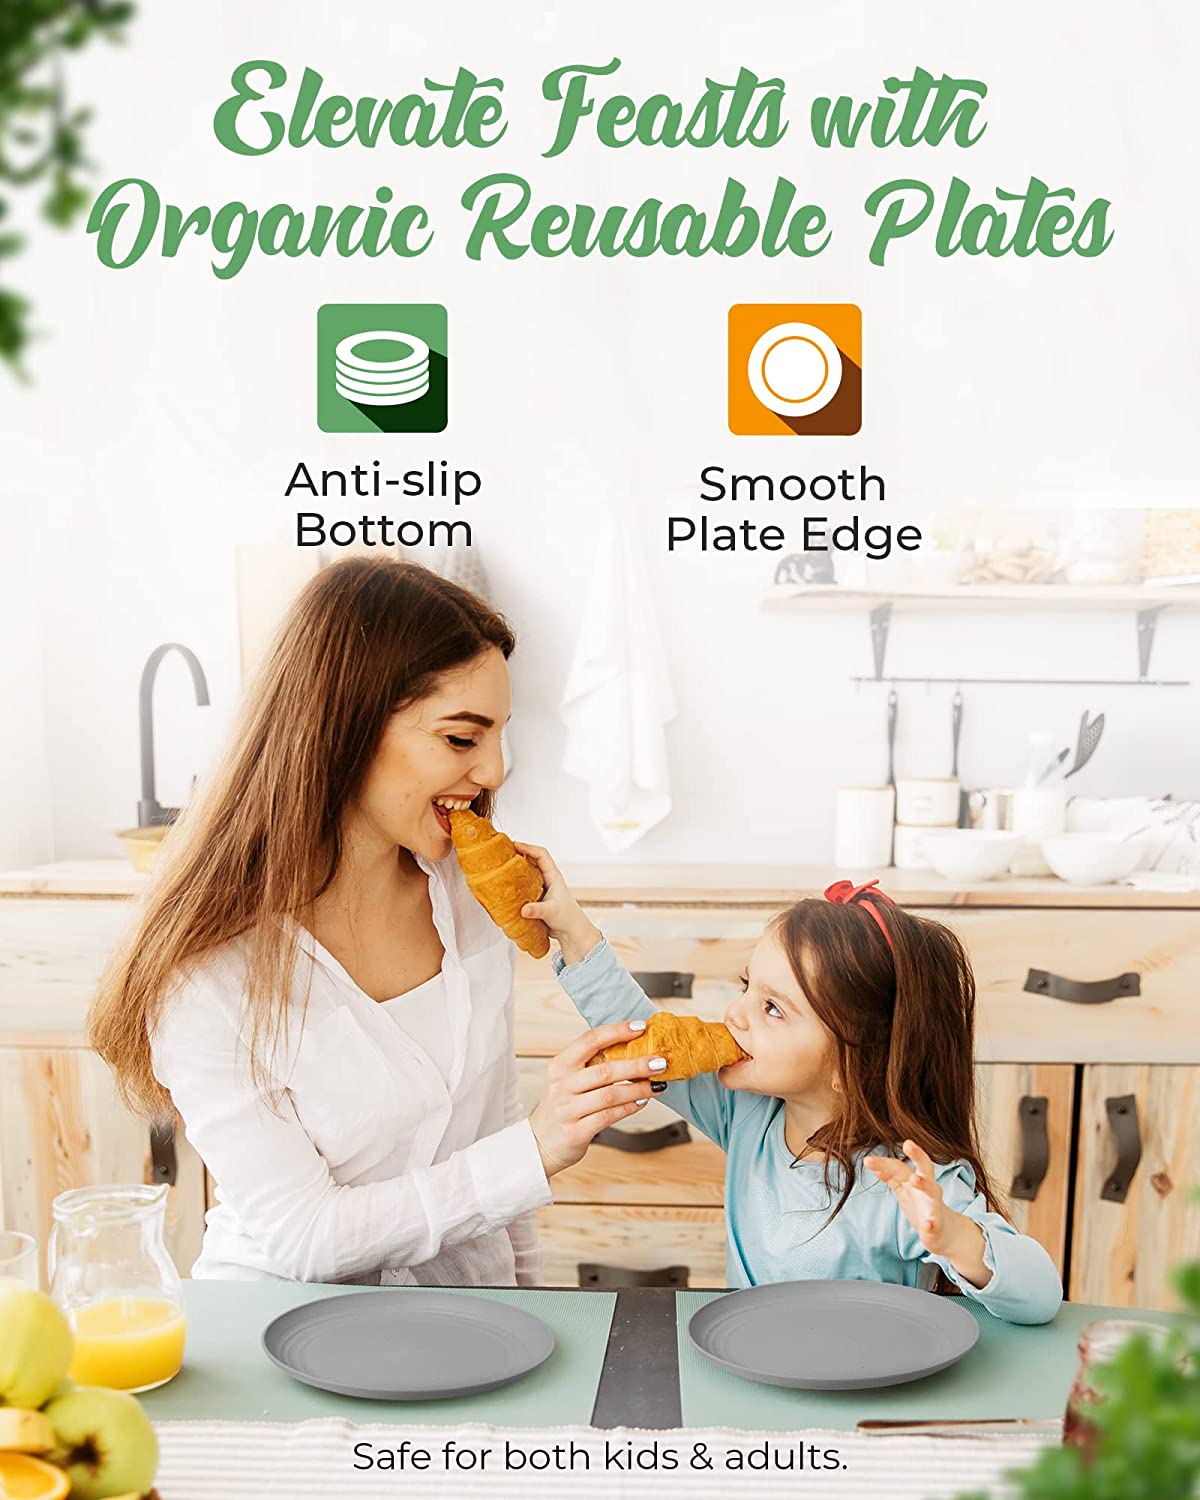 New Set of 4 Wheat Straw Plates - Reusable Unbreakable Wheatstraw Plastic Dishes Dinner Plates - Deep Plates with Lip Edge, Microwave & Dishwasher Safe Microwavable Wheat Plates, Camping Plates Set